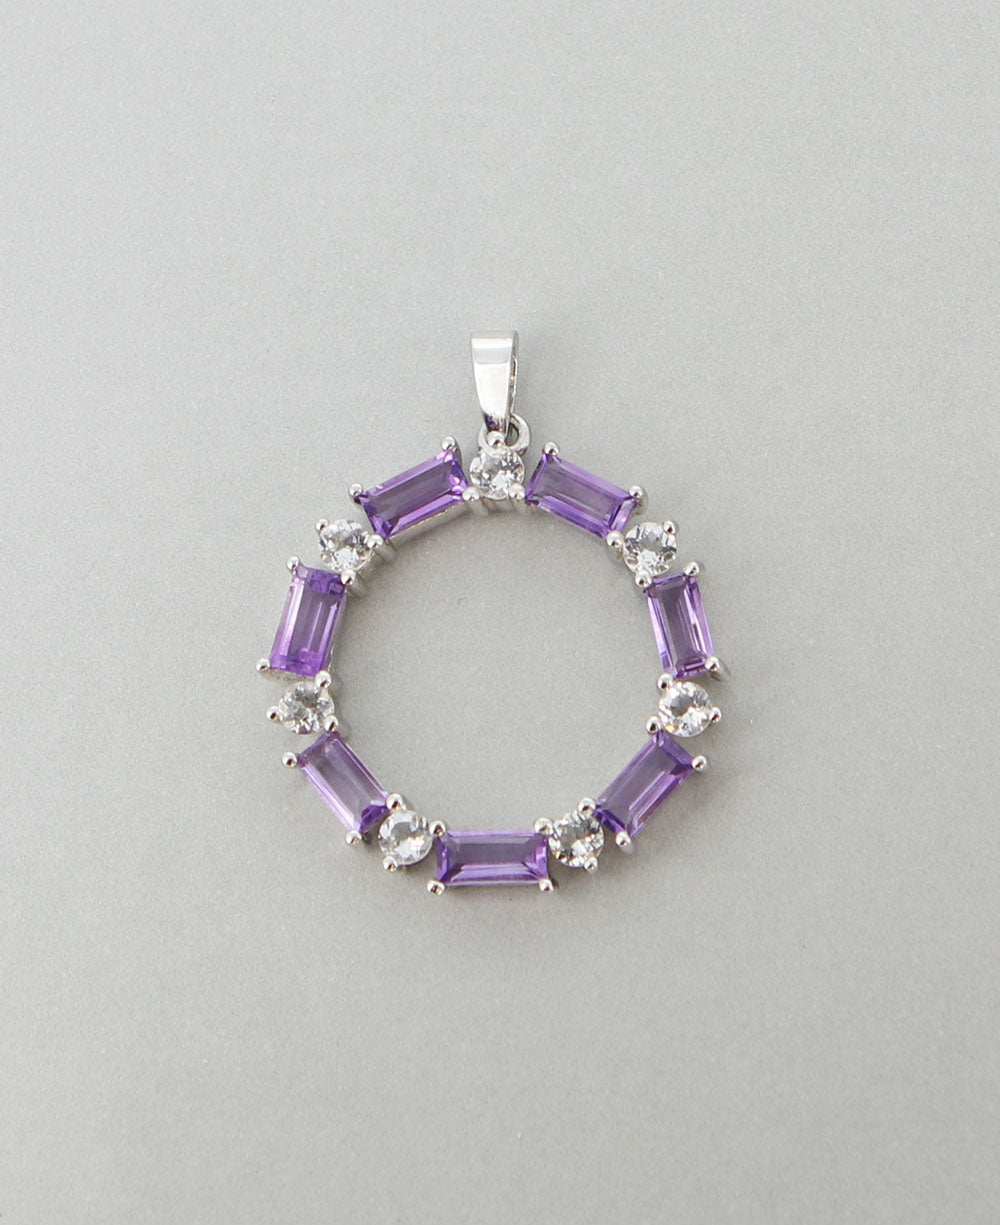 Premium Wheel of Tranquility Amethyst Sterling Pendant - Charms & Pendants